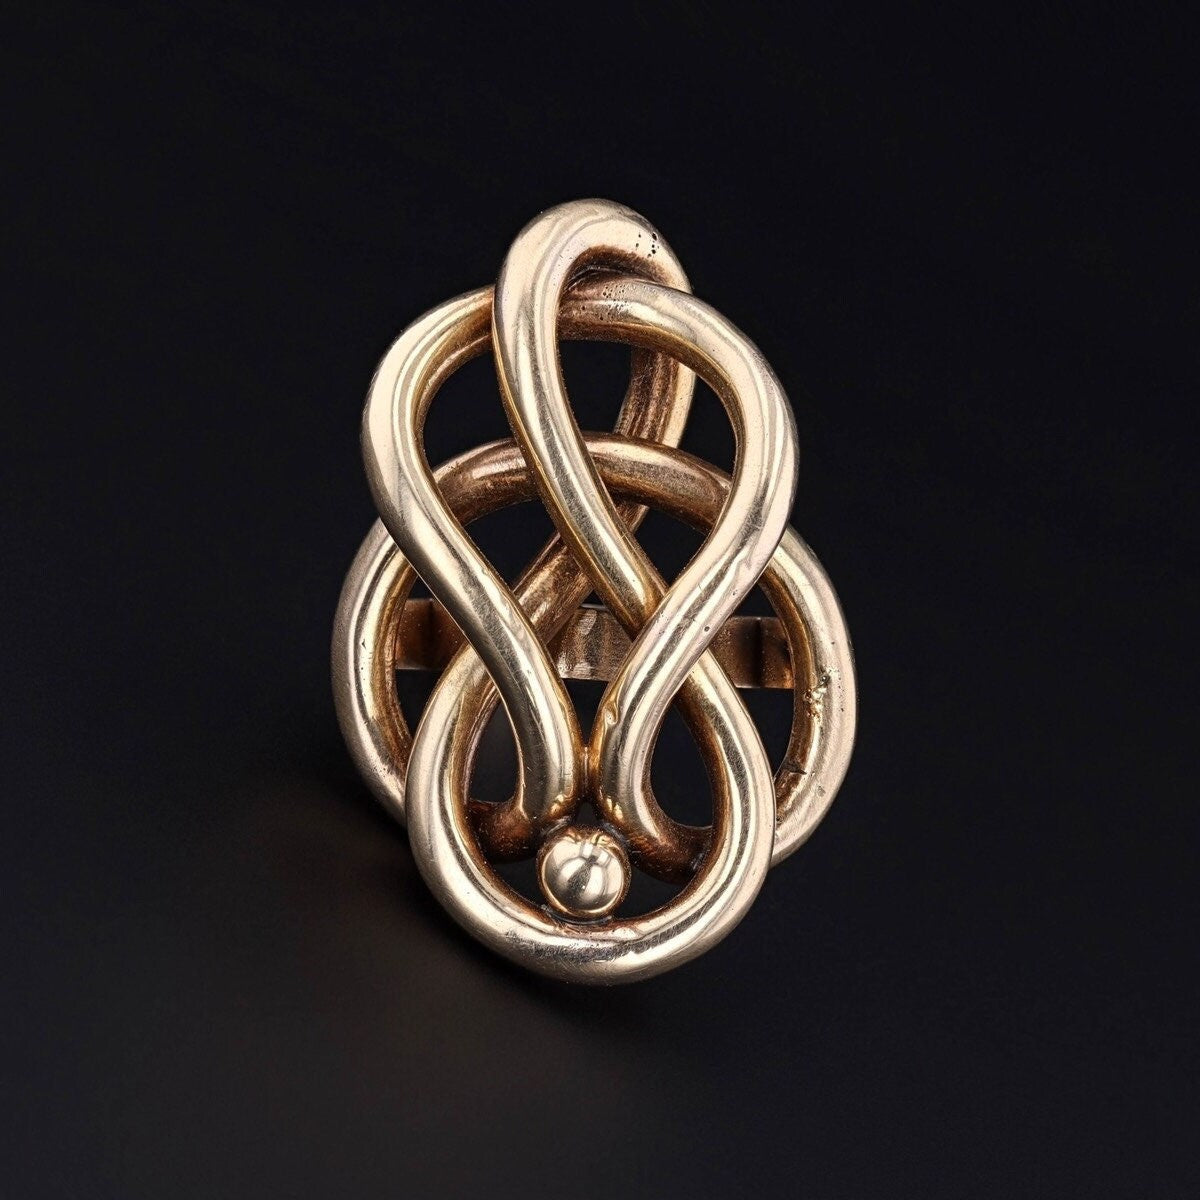 Antique Love Knot Conversion Statement Ring of 14k Gold